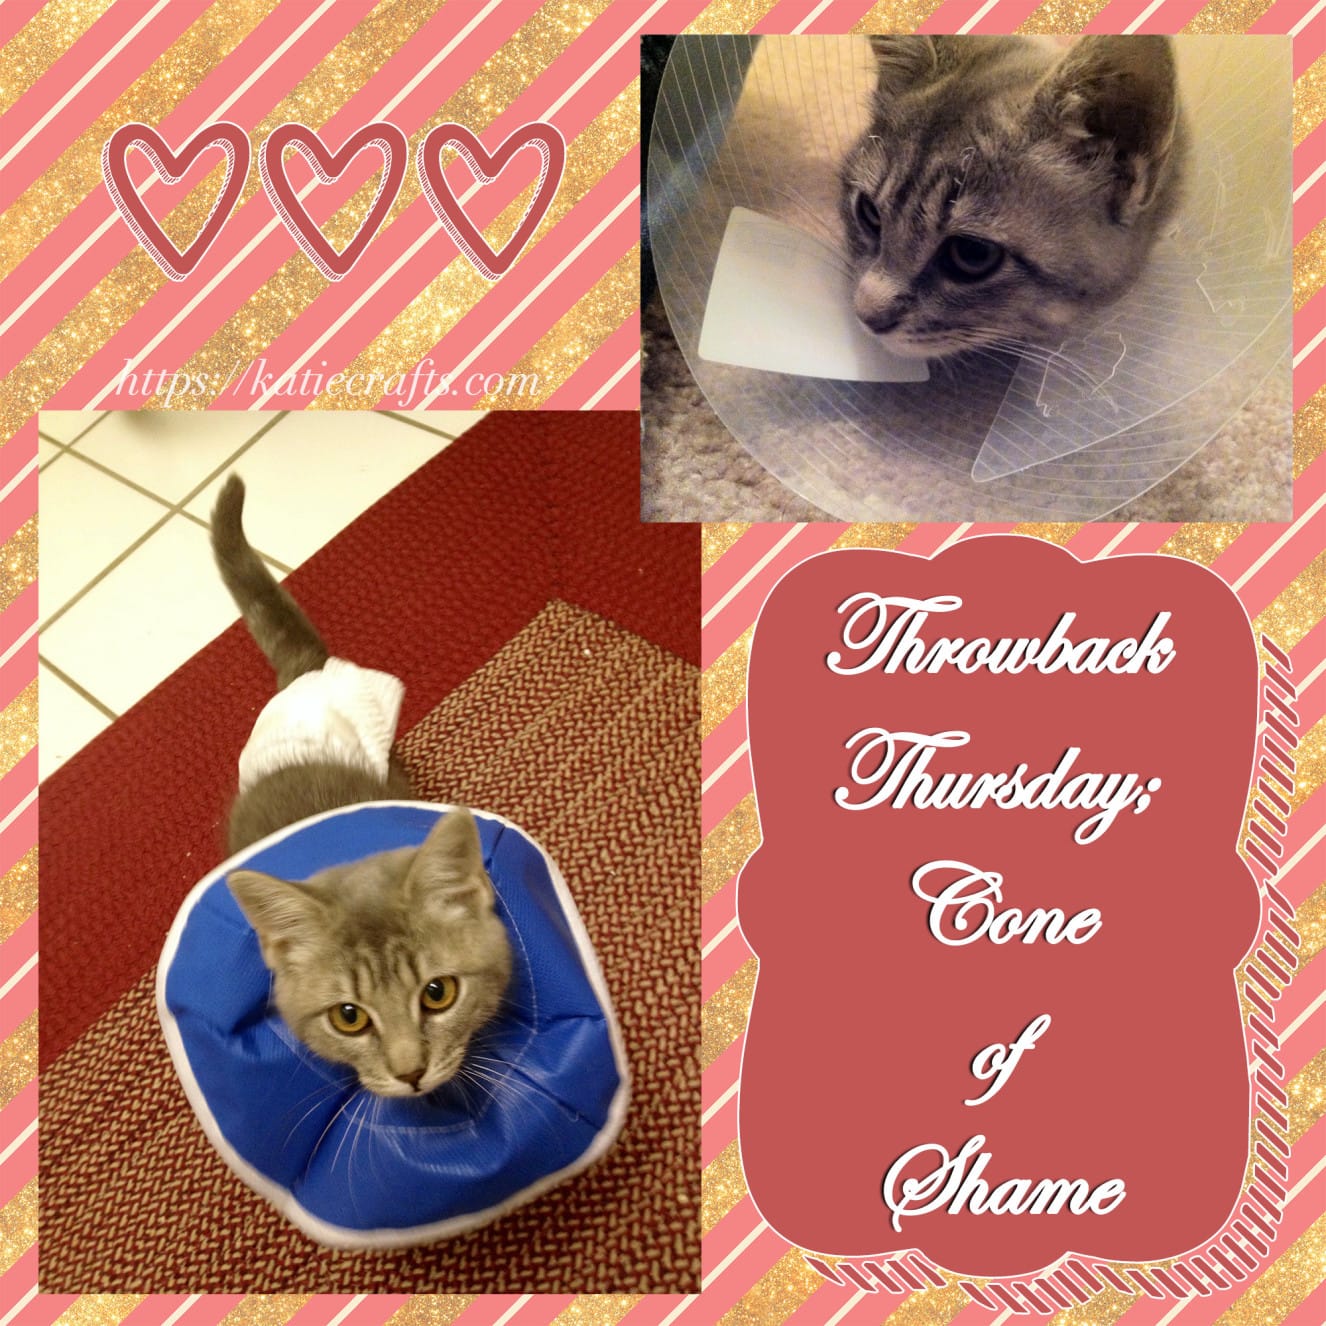 Throwback Thursday: Cone of Shame on Katie Crafts; https://www.katiecrafts.com